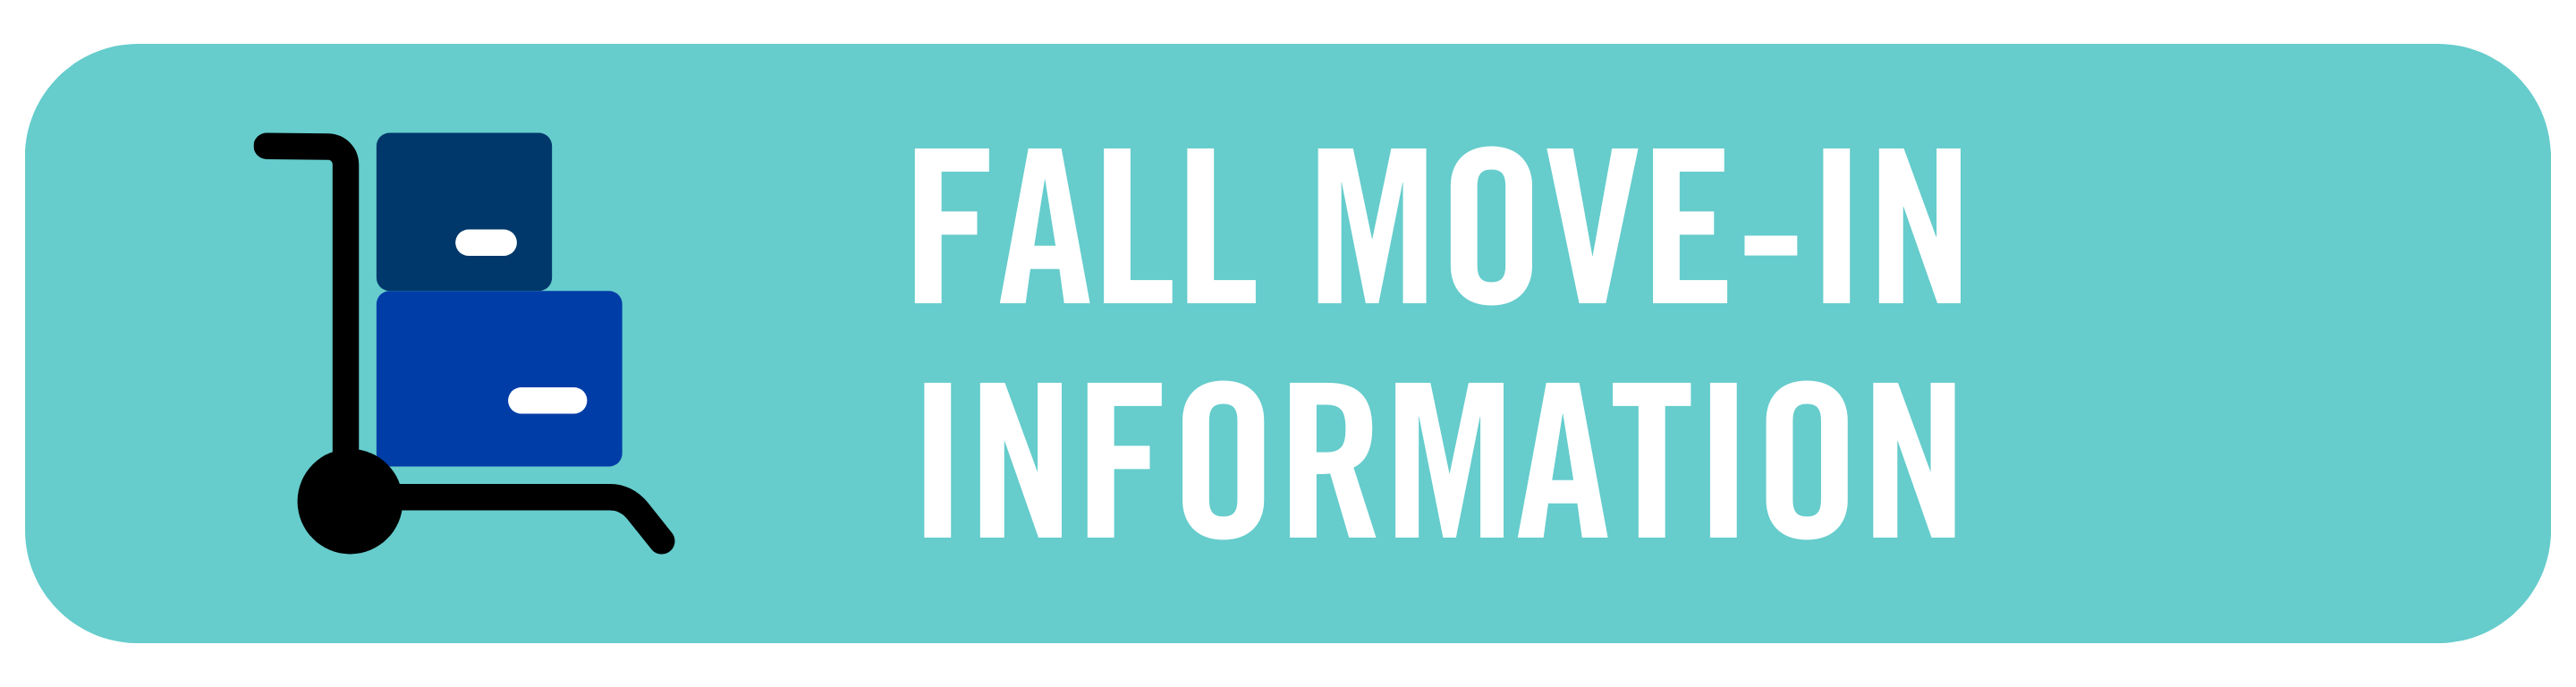 Fall Move In Information